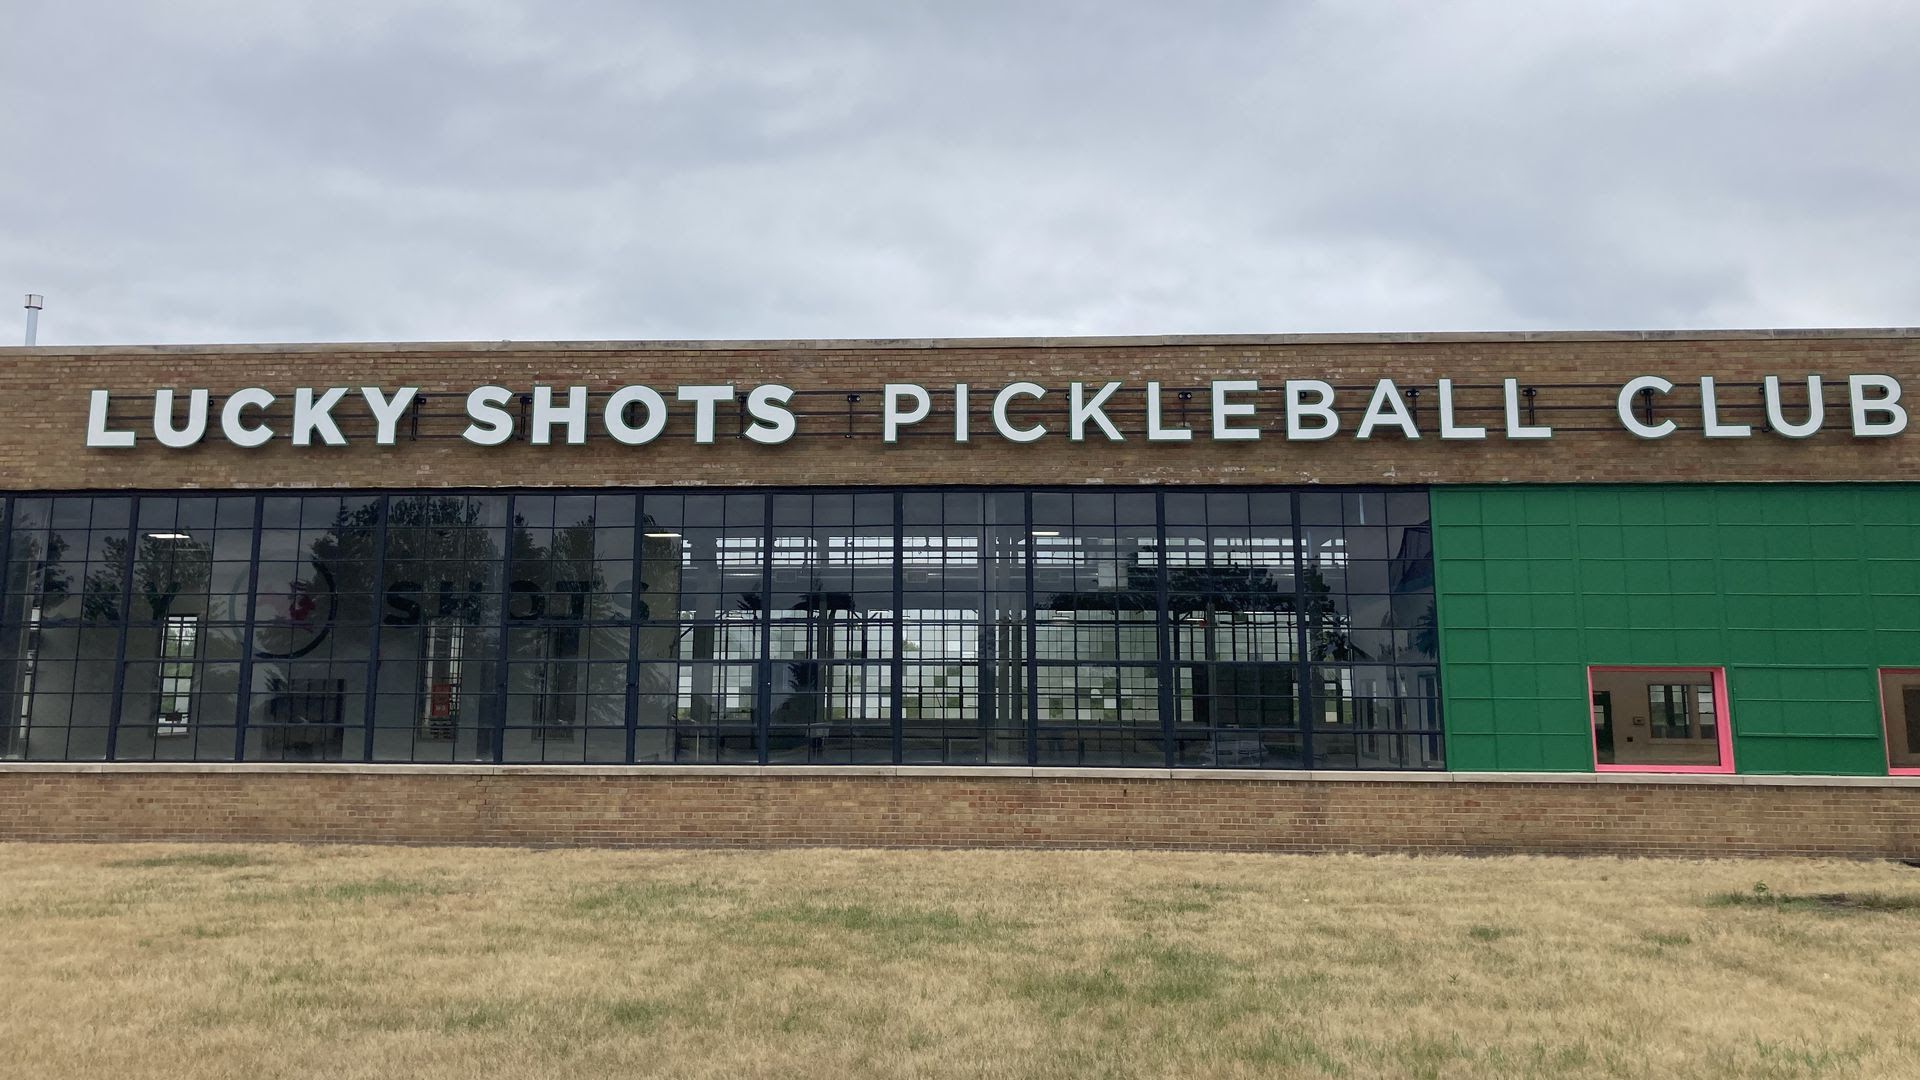 The exterior of Lucky Shots Pickleball Club, a new pickleball facility in Minneapolis.